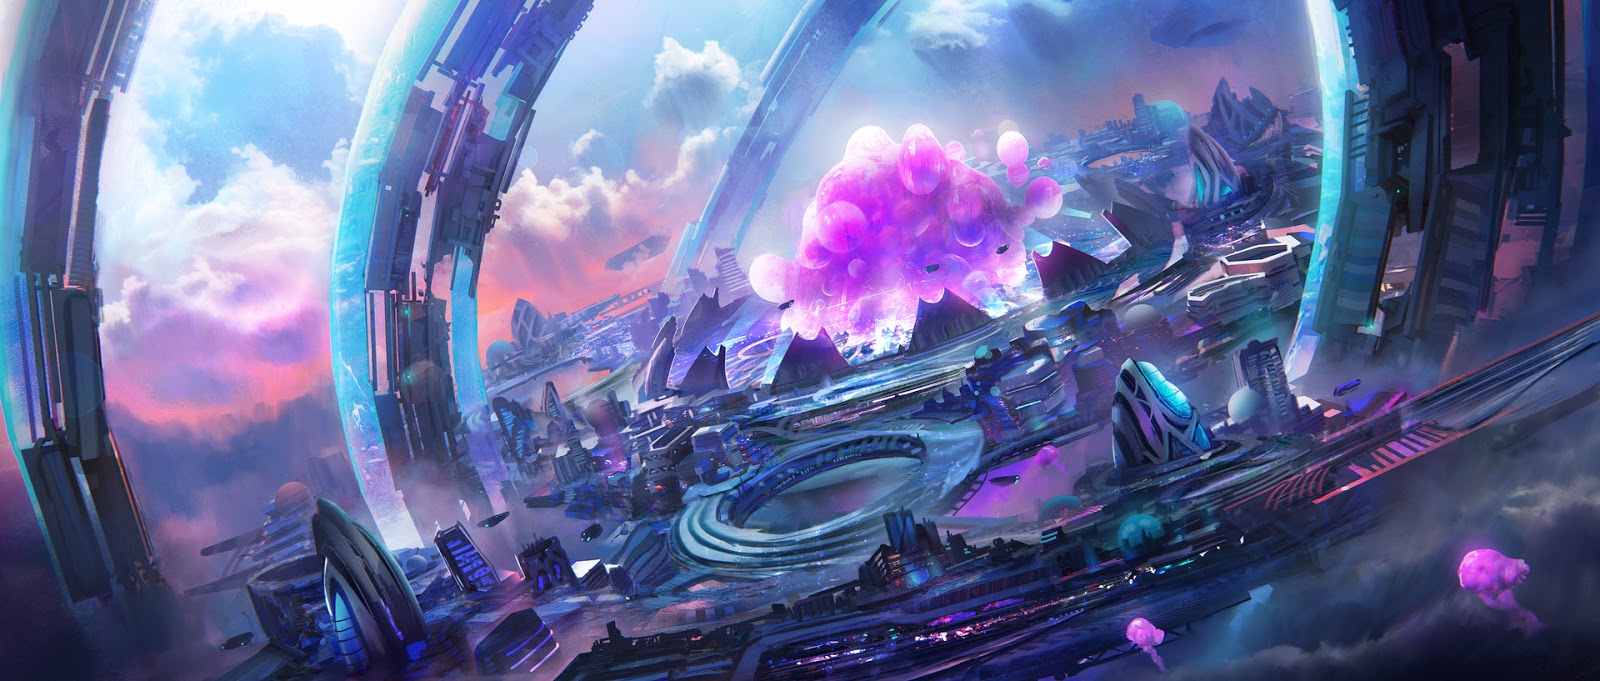 Images: A Collection Of Stunning Sci-Fi Concept & Environmental Art ...